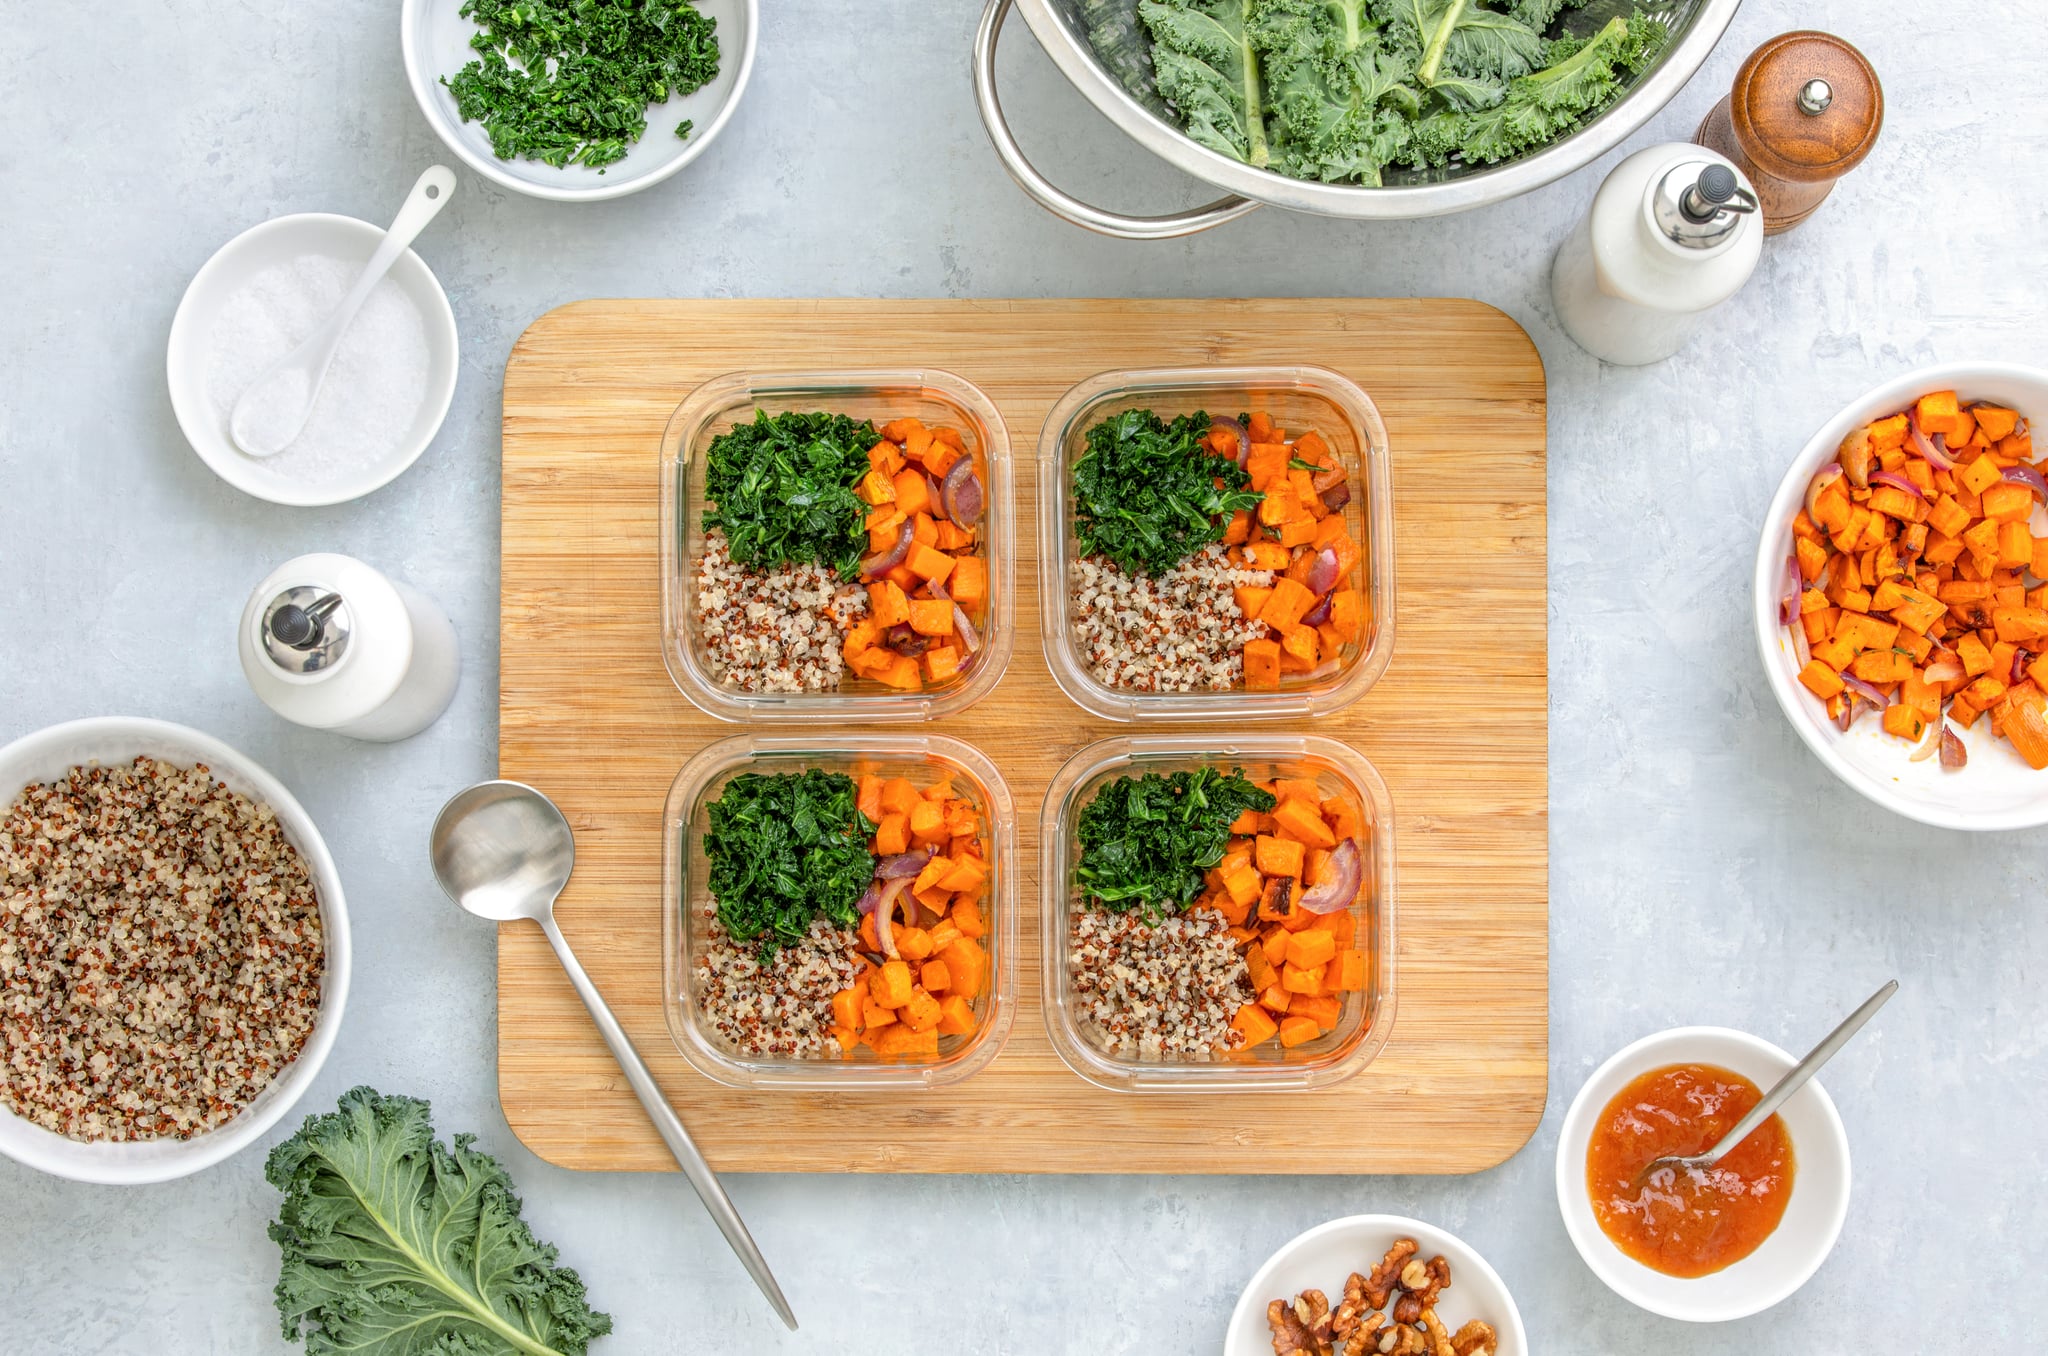 Quinoa, kale and roasted sweet potato lunch boxes are standing on a kitchen table with ingredients for cooking, overhead view, fall healthy take-away lunch recipe concept